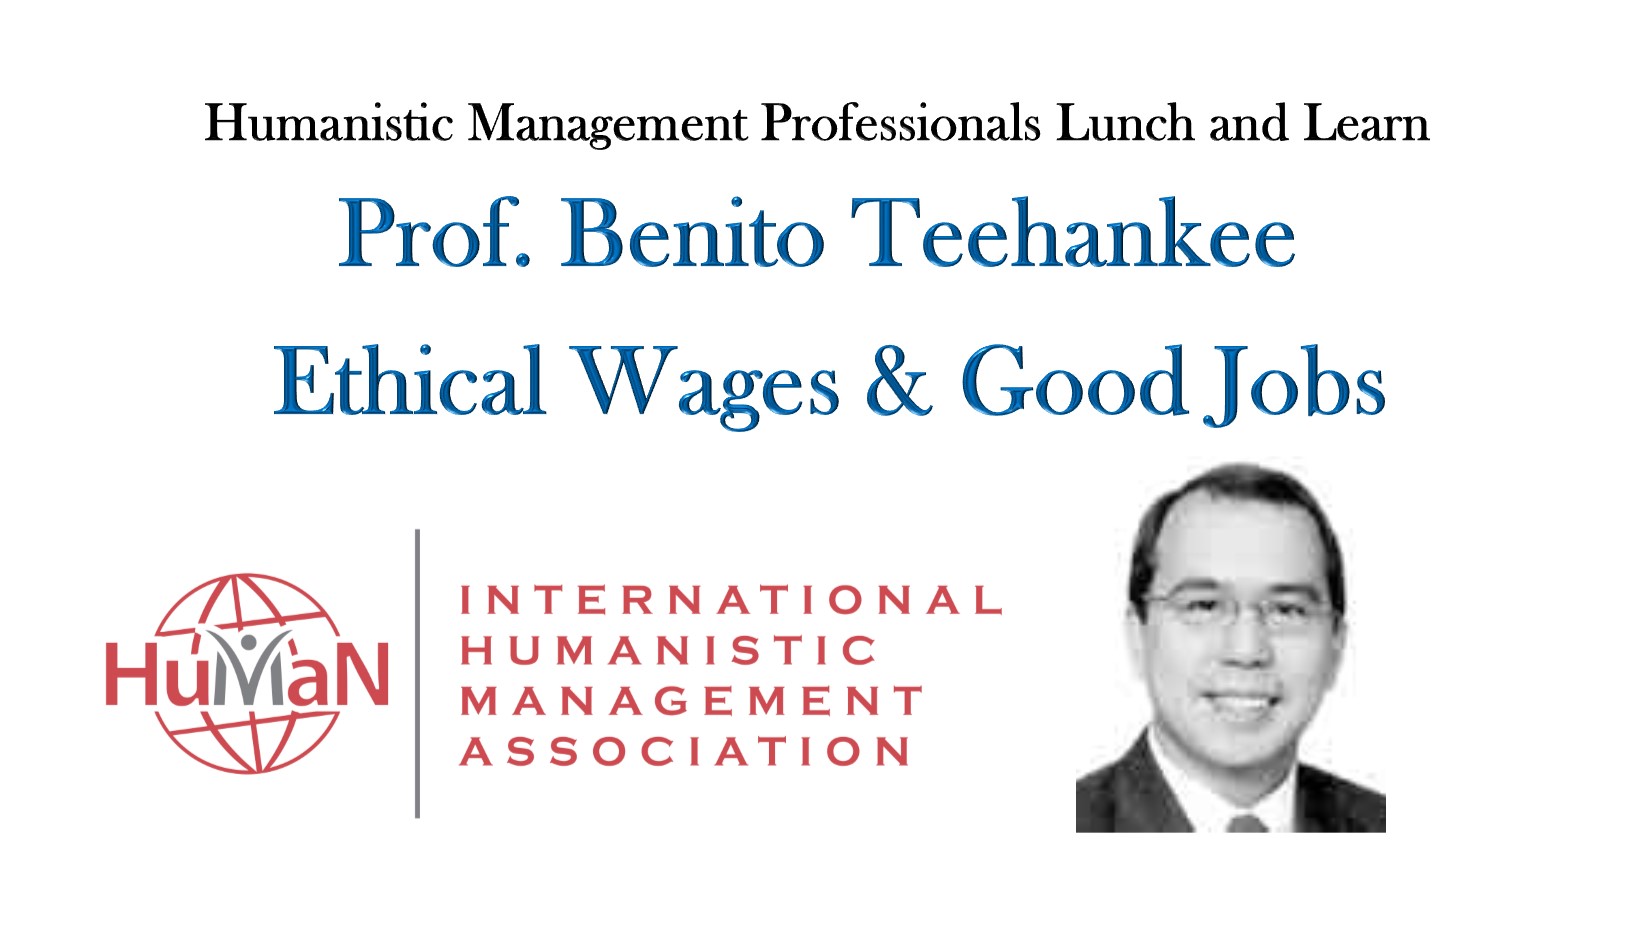 Ethical Wages & Good Jobs – With Prof. Benito Teehankee